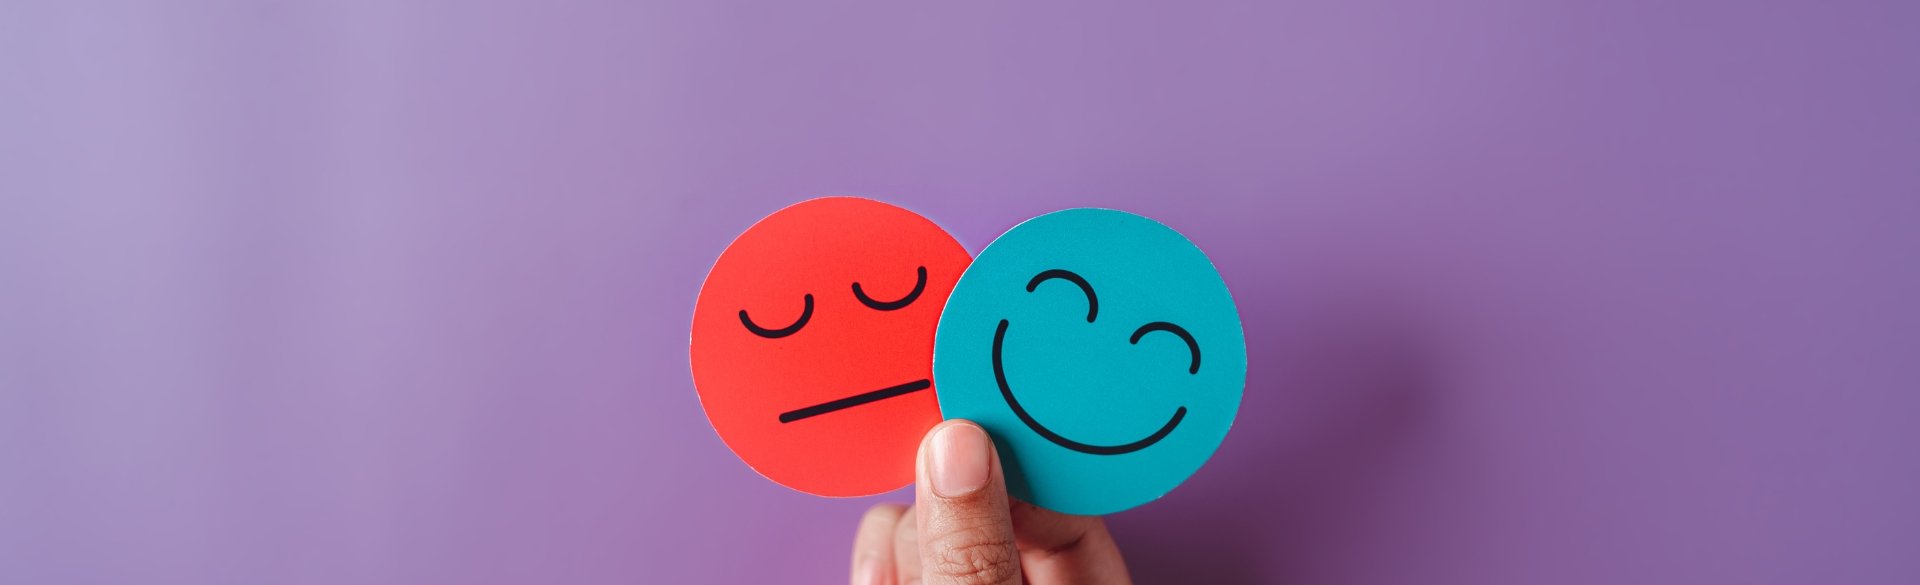 Person holding happy and sad faces